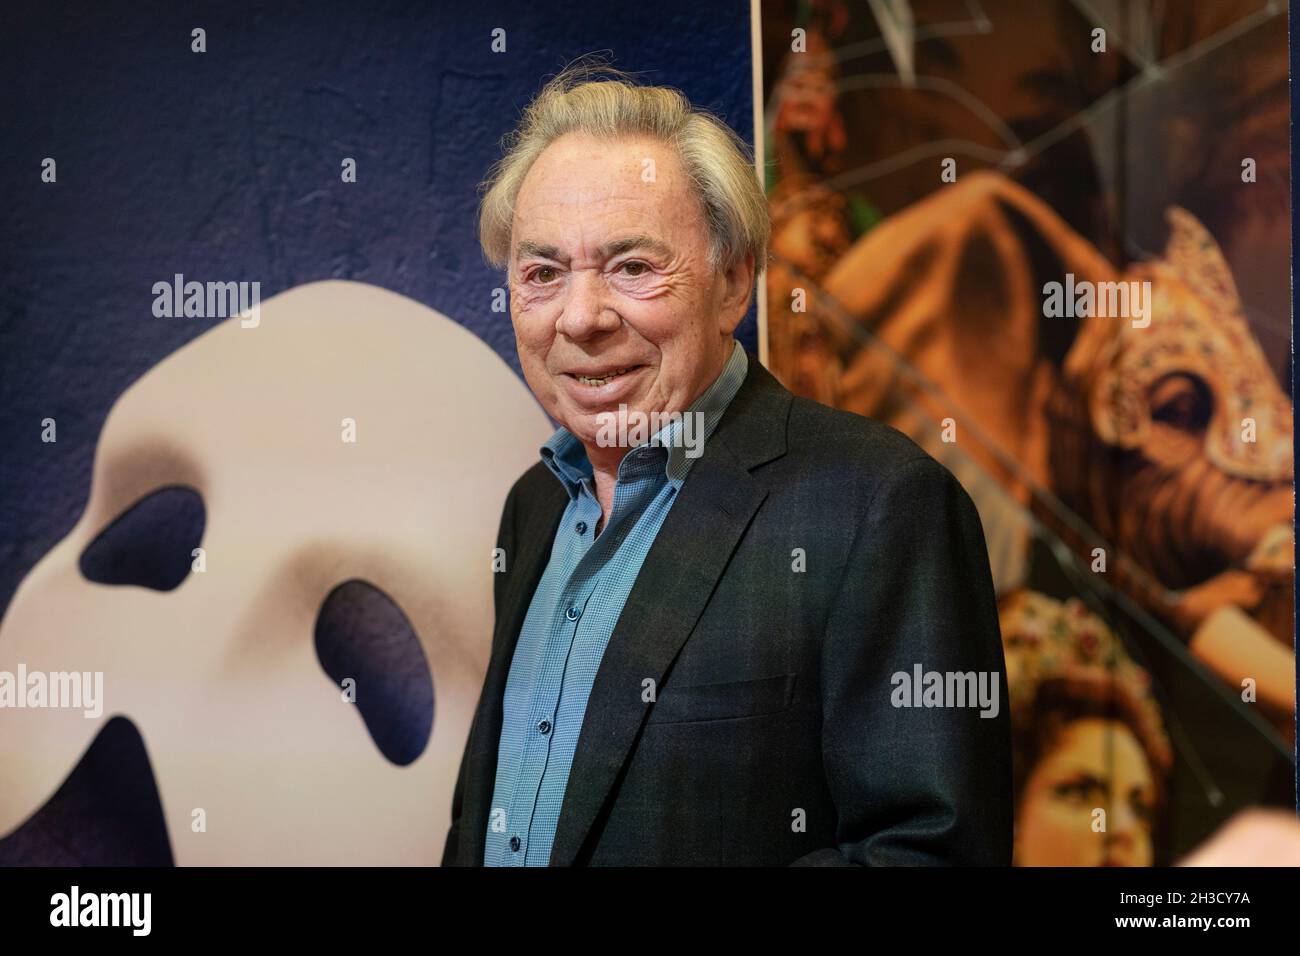 New York, NY - October 22, 2021: Composer Sir Andrew Lloyd Webber attends The Phantom of the Opera first performance after pandemic at Majestic Theatre Stock Photo